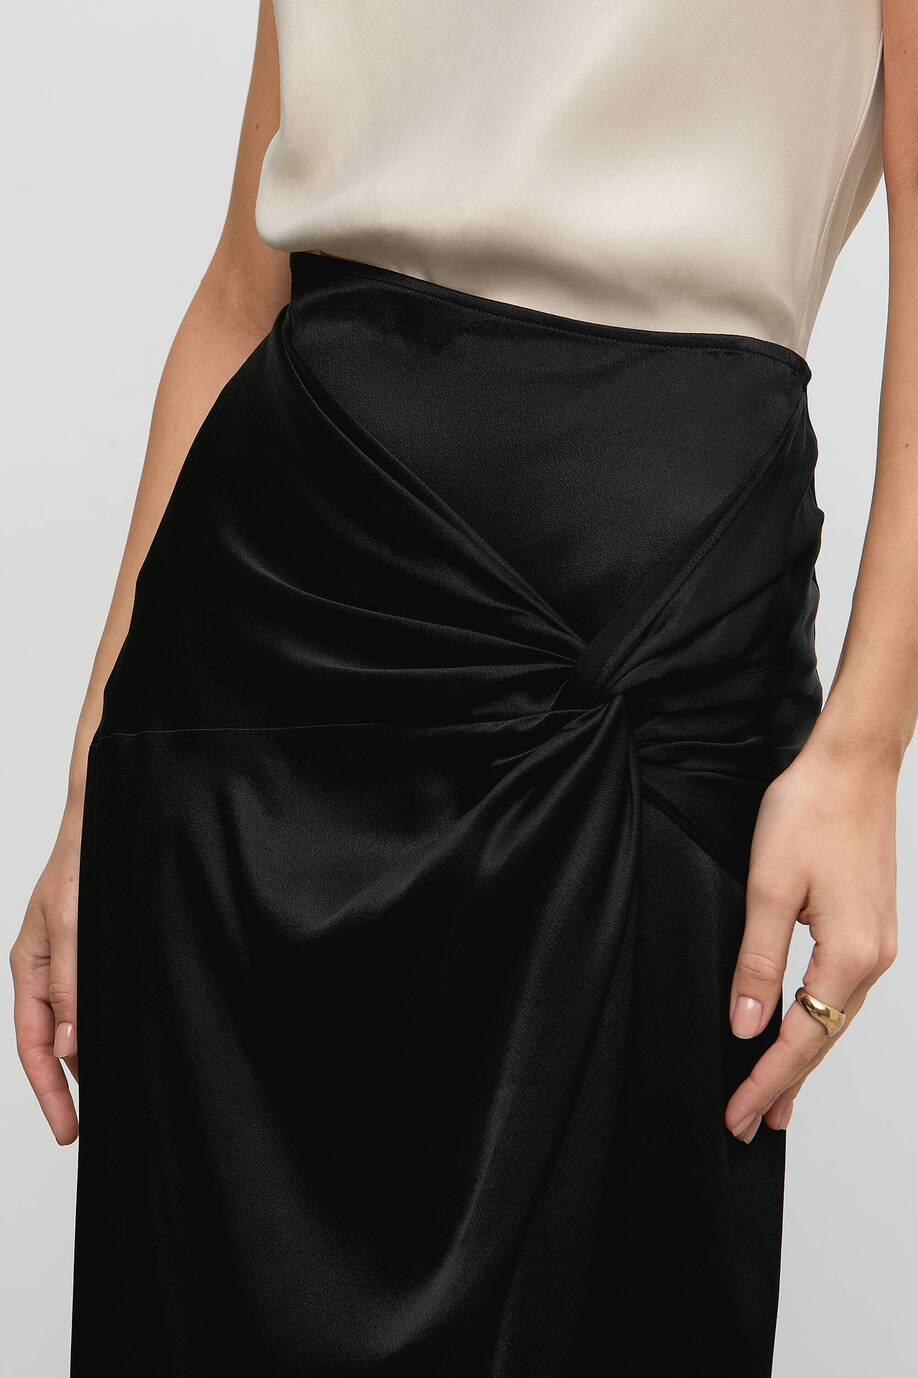 Satin skirt with a knot